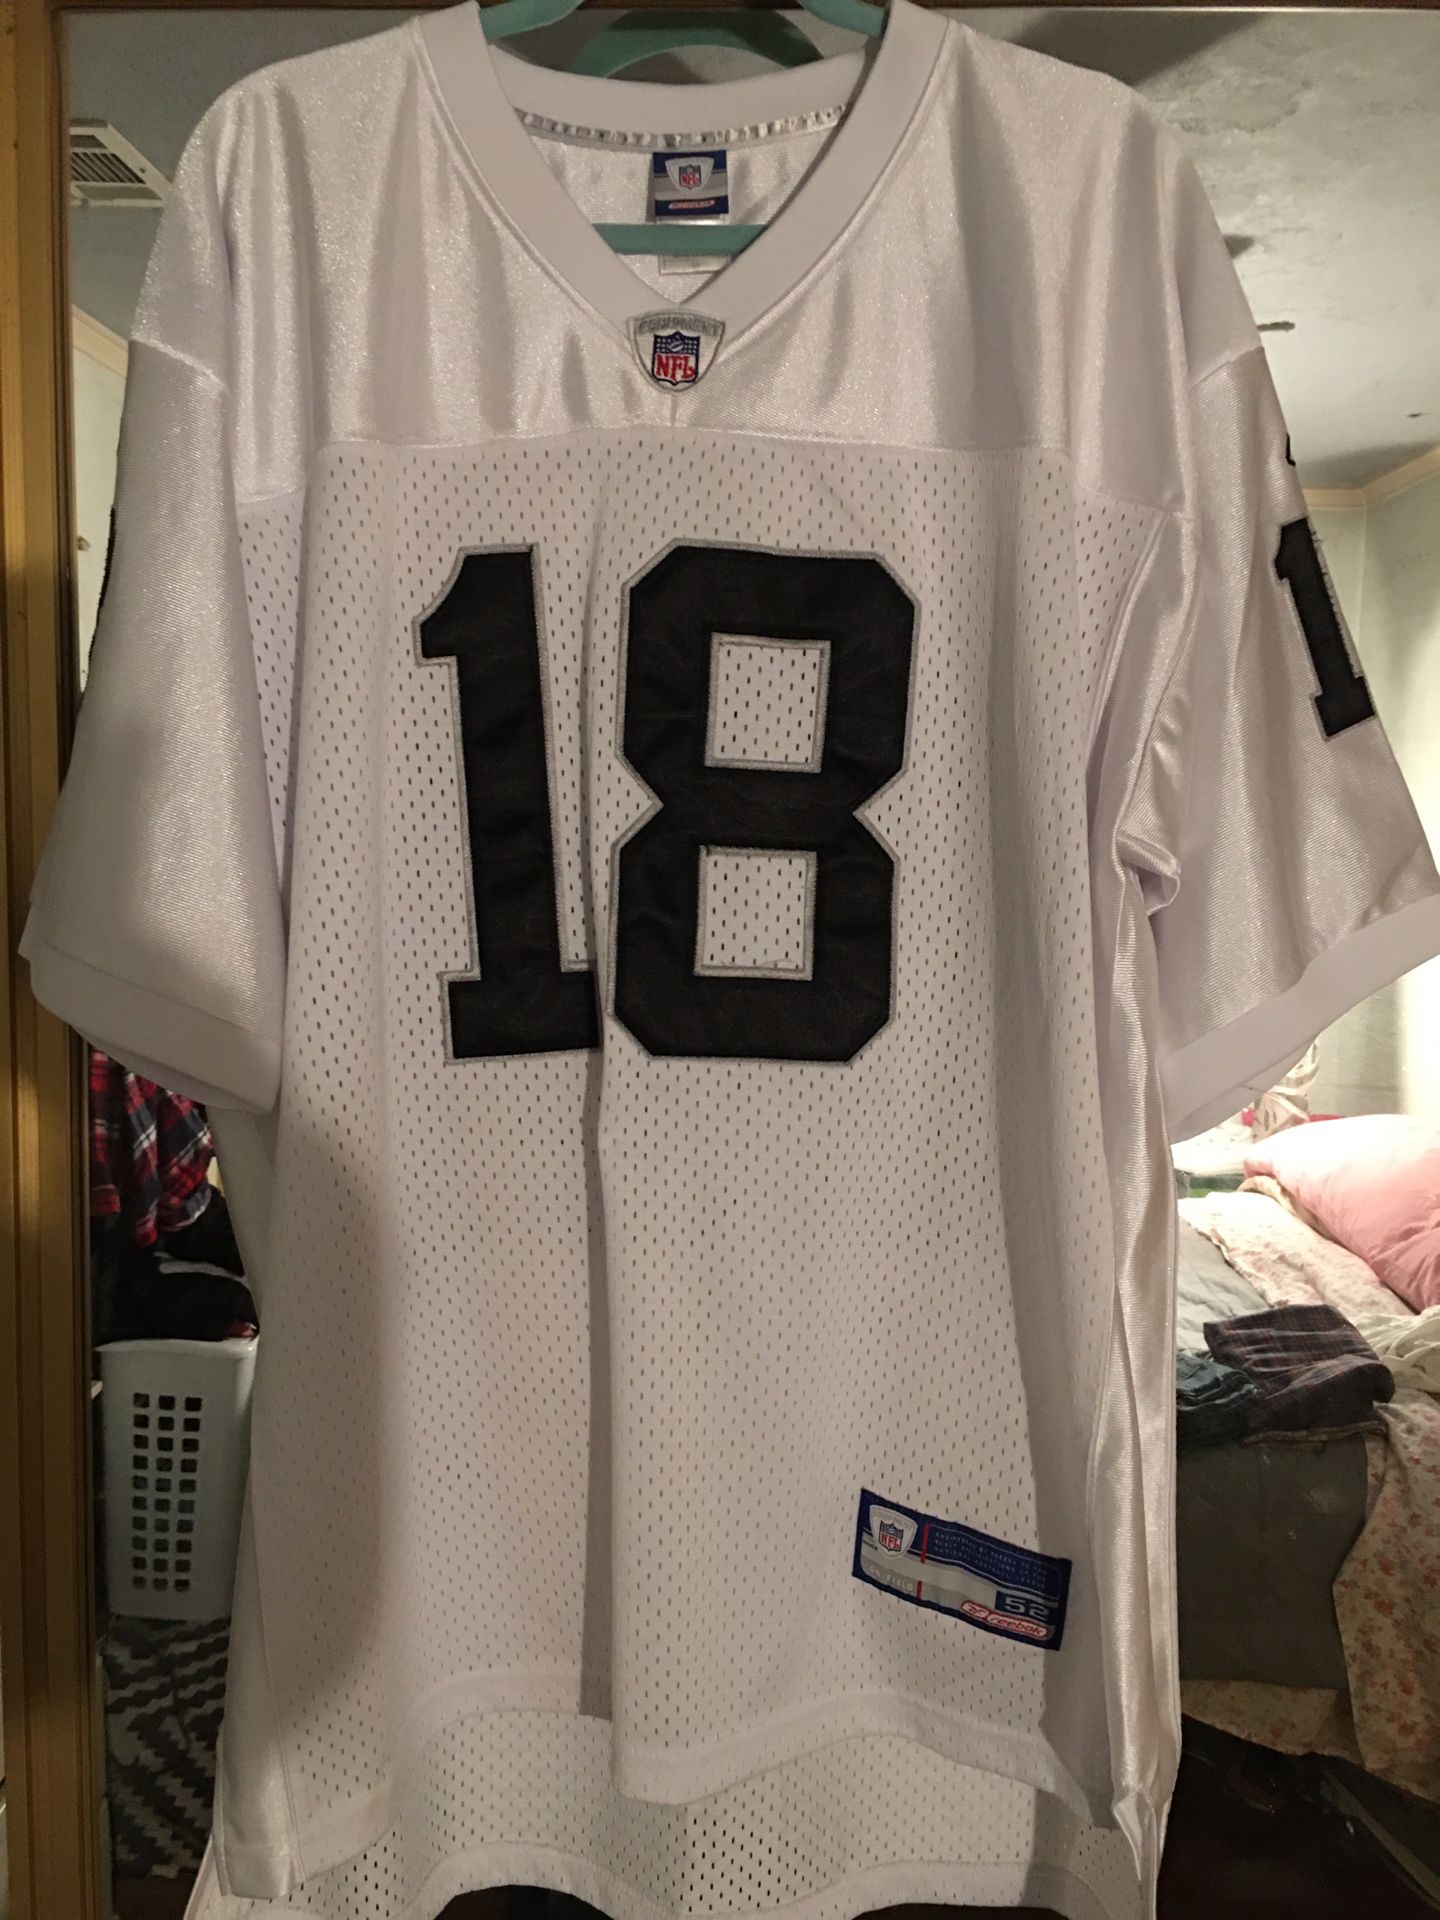 Genuine Raiders Jersey Randy Moss 18 STITCHED JERSEY SIZE 52 XXL WORN ONE TIME GIVE ME A OFFER